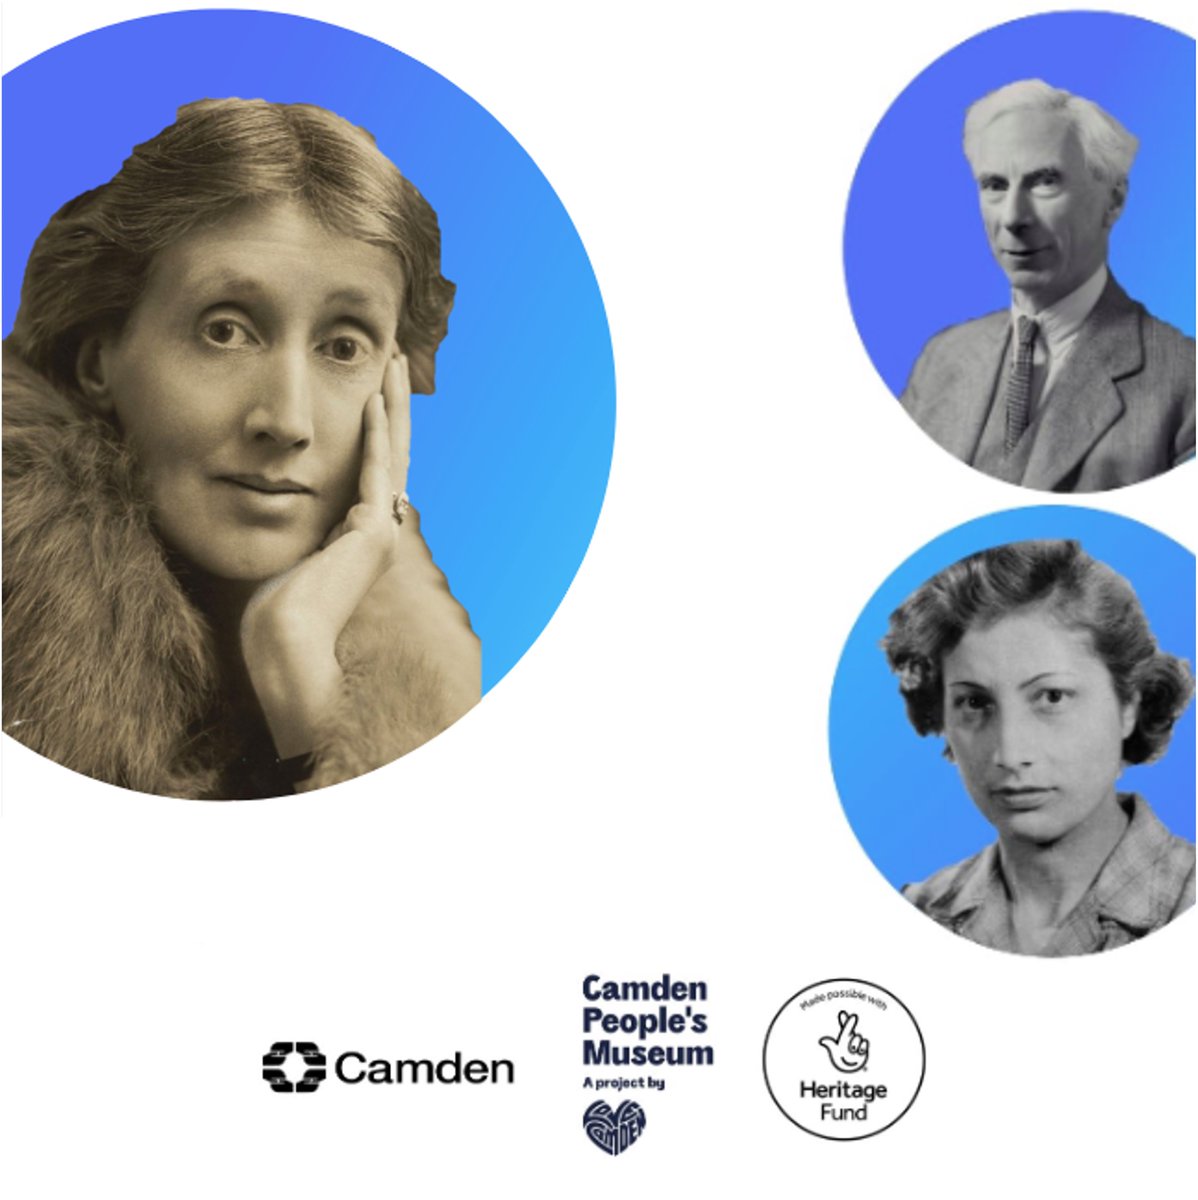 Come along to a preview of our new exhibition of RePresenting Bloomsbury - examining the lives and works of Virginia Woolf, Noor Inayat Khan and Bertrand Russell.

⏰Weds 17th Jan, 6-8pm
🏛️Swiss Cottage Gallery
👉rsvp culture@camden.gov.uk

#ArtsandHeritage #History #Culture